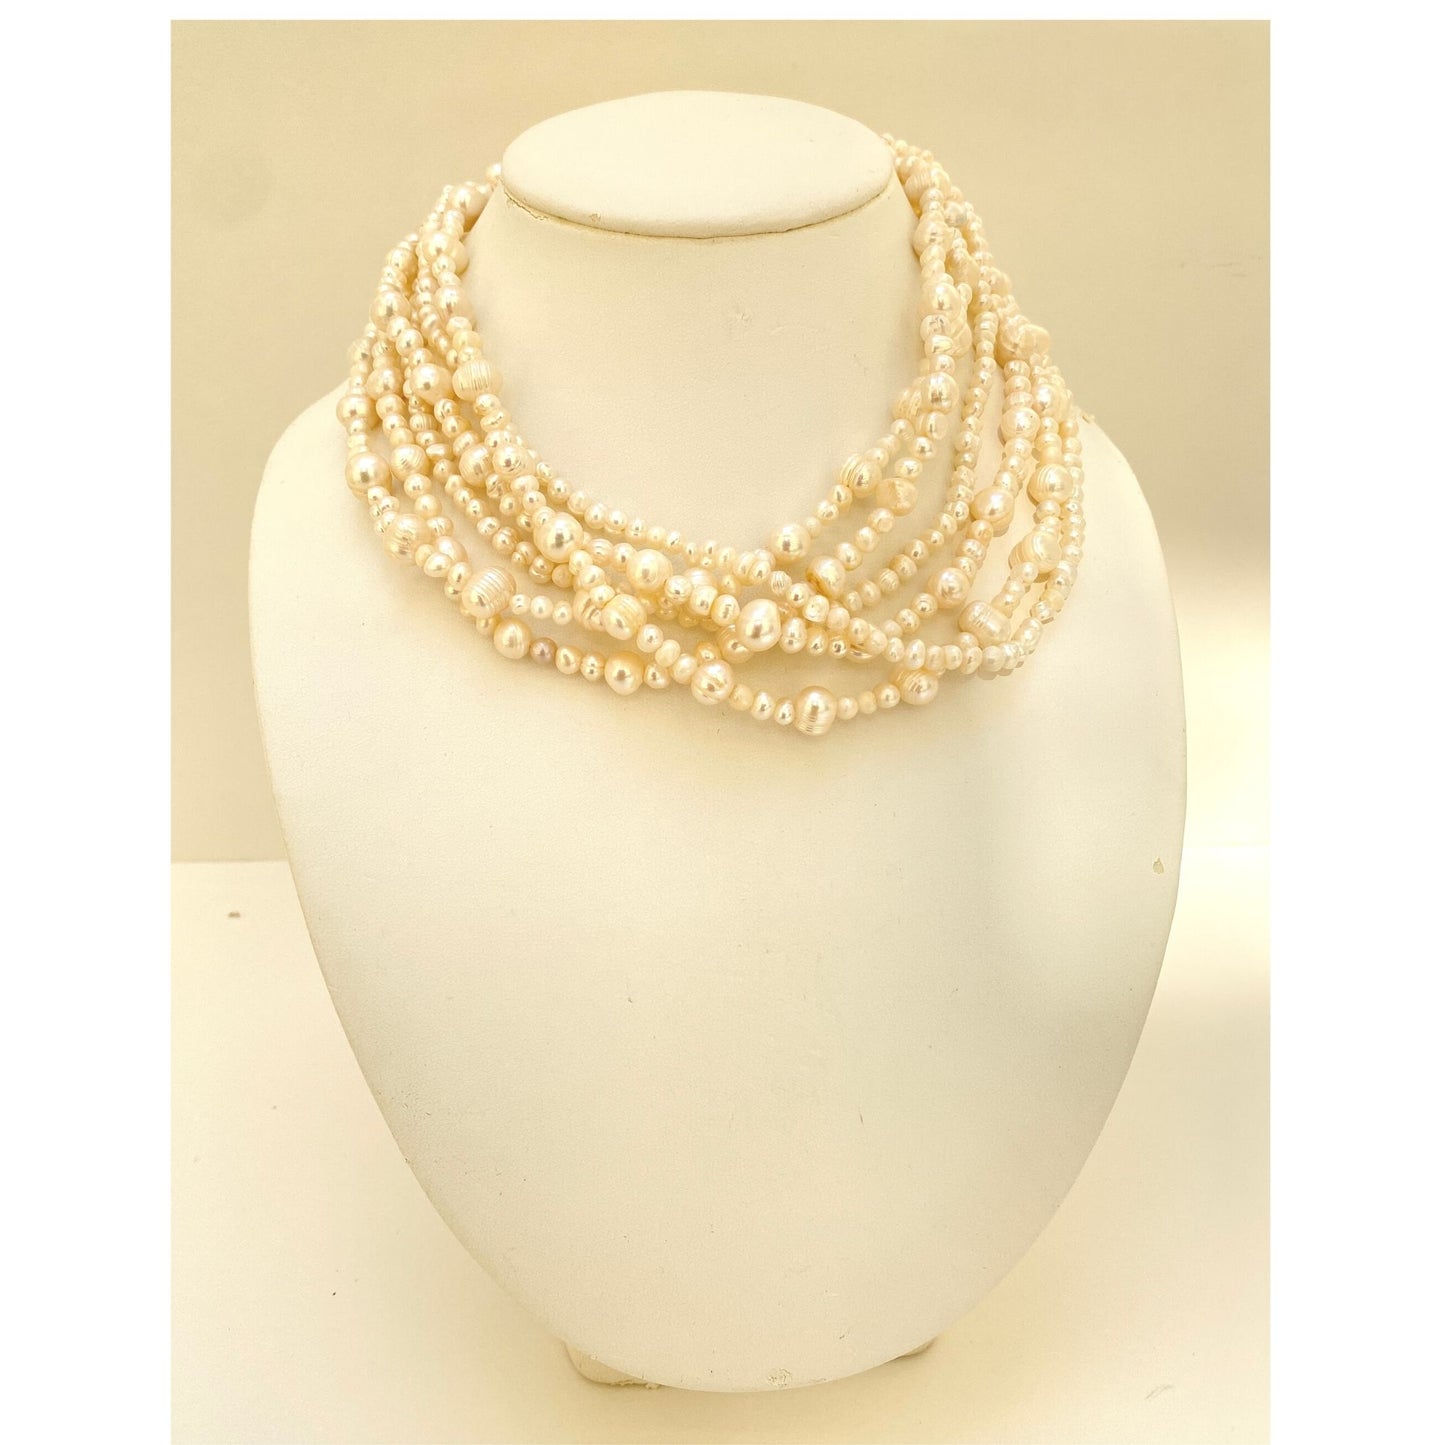 Mother of Pearl Necklace | Three Strand | 33 inches